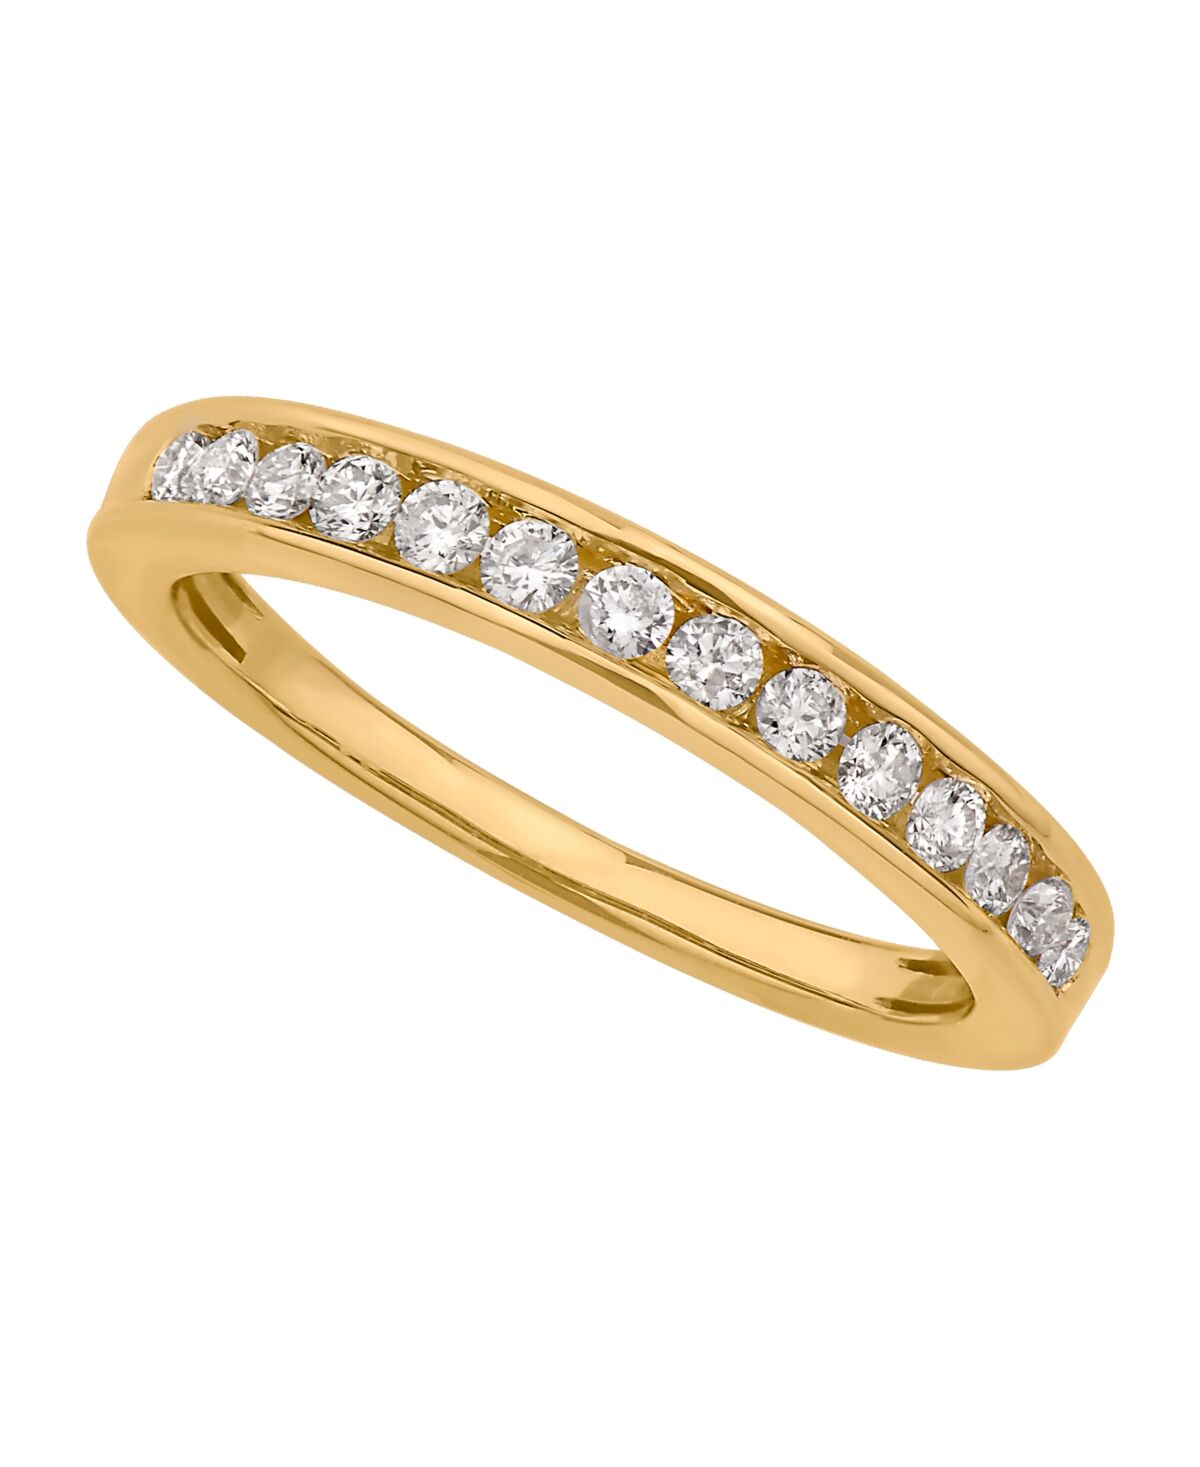 Macy's Certified Diamond Channel Band 1/4 ct. t.w. in 14k White or Yellow Gold - Yellow Gold